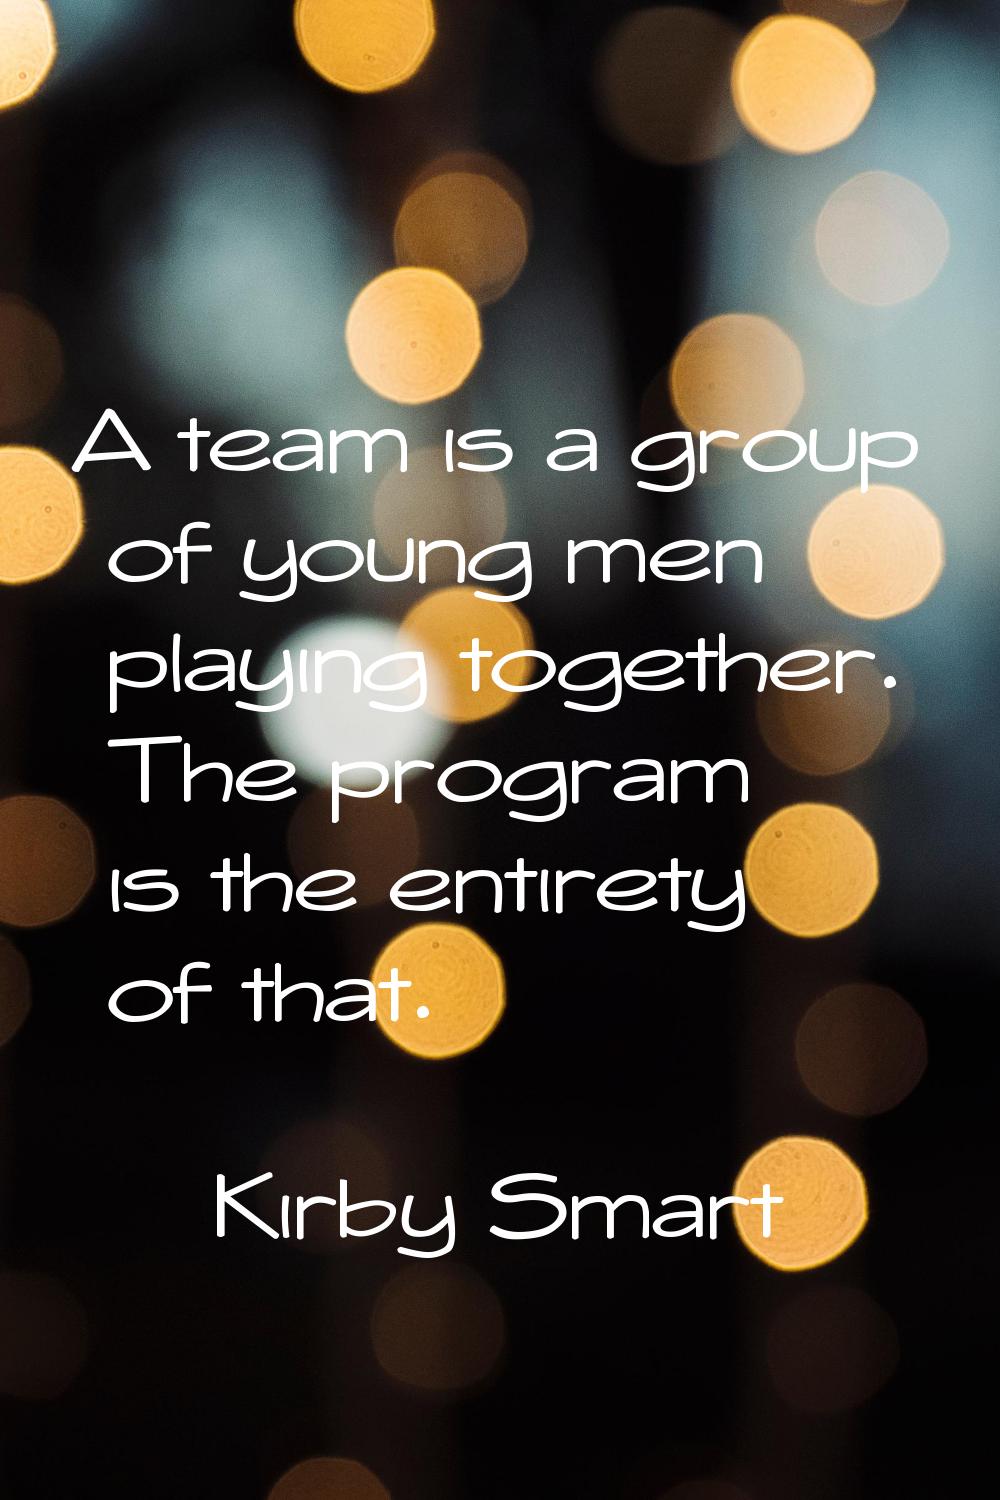 A team is a group of young men playing together. The program is the entirety of that.